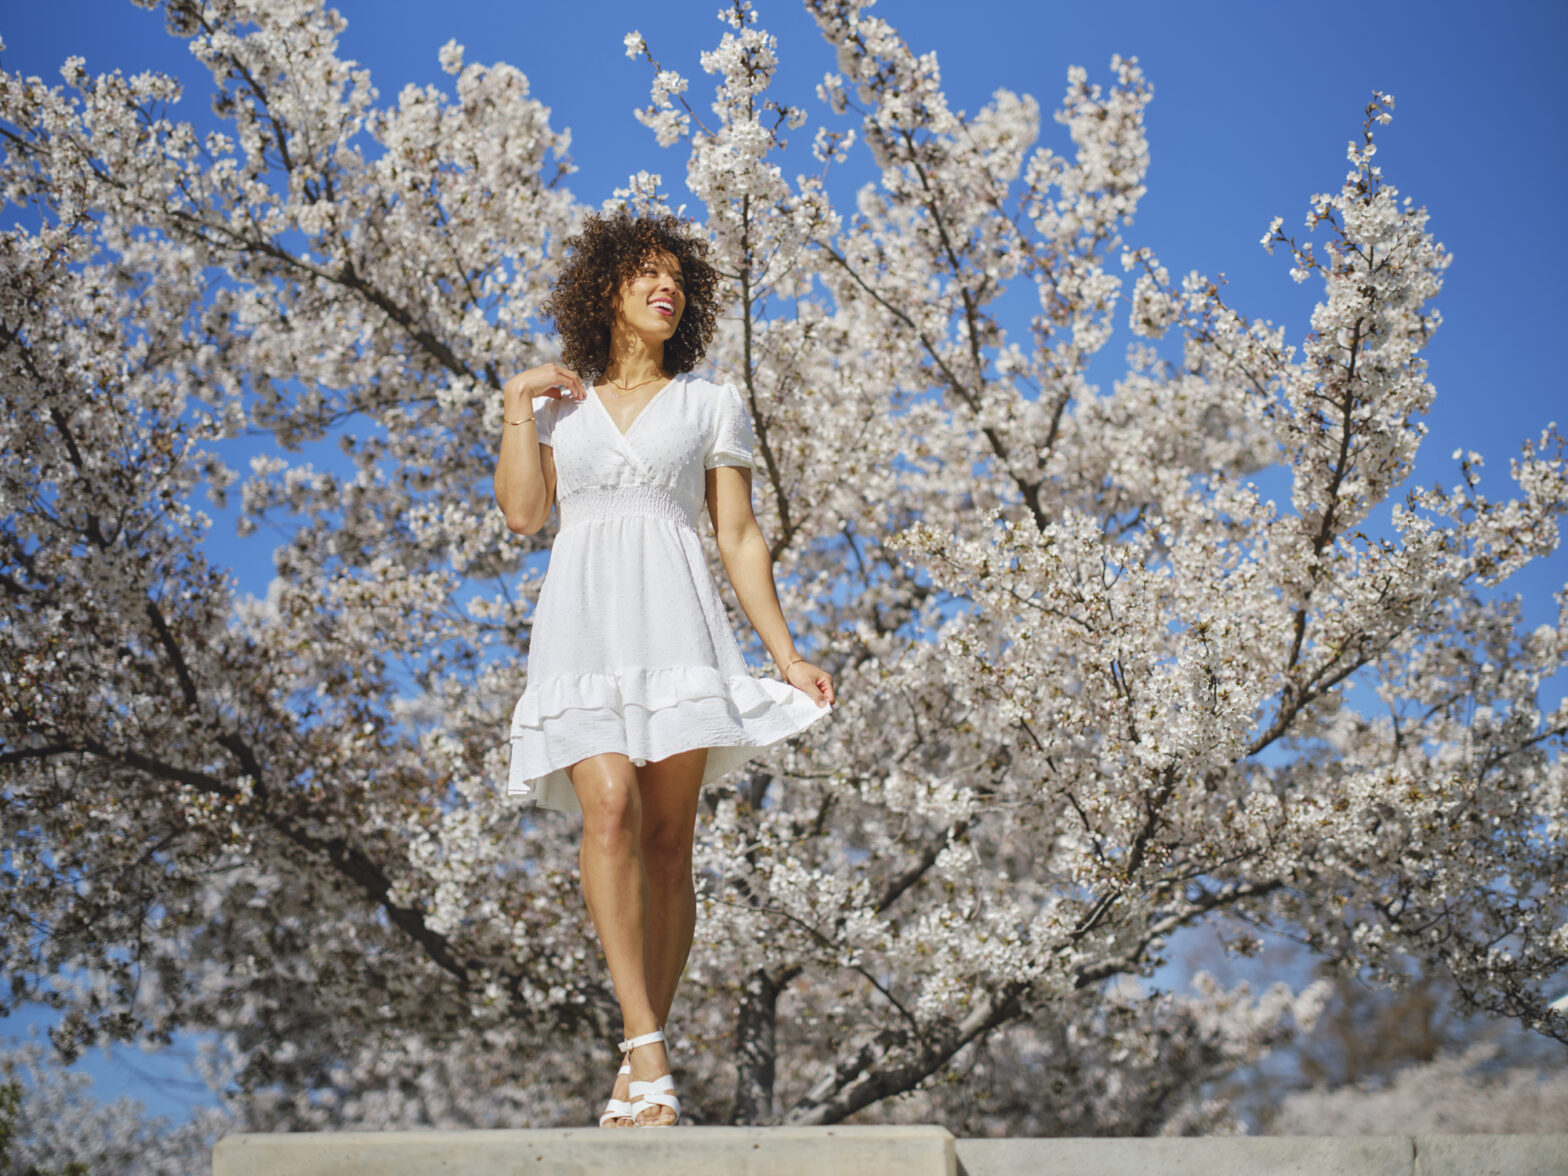 A portrait of a multiracial woman in springtime outdoors among cherry blossoms.